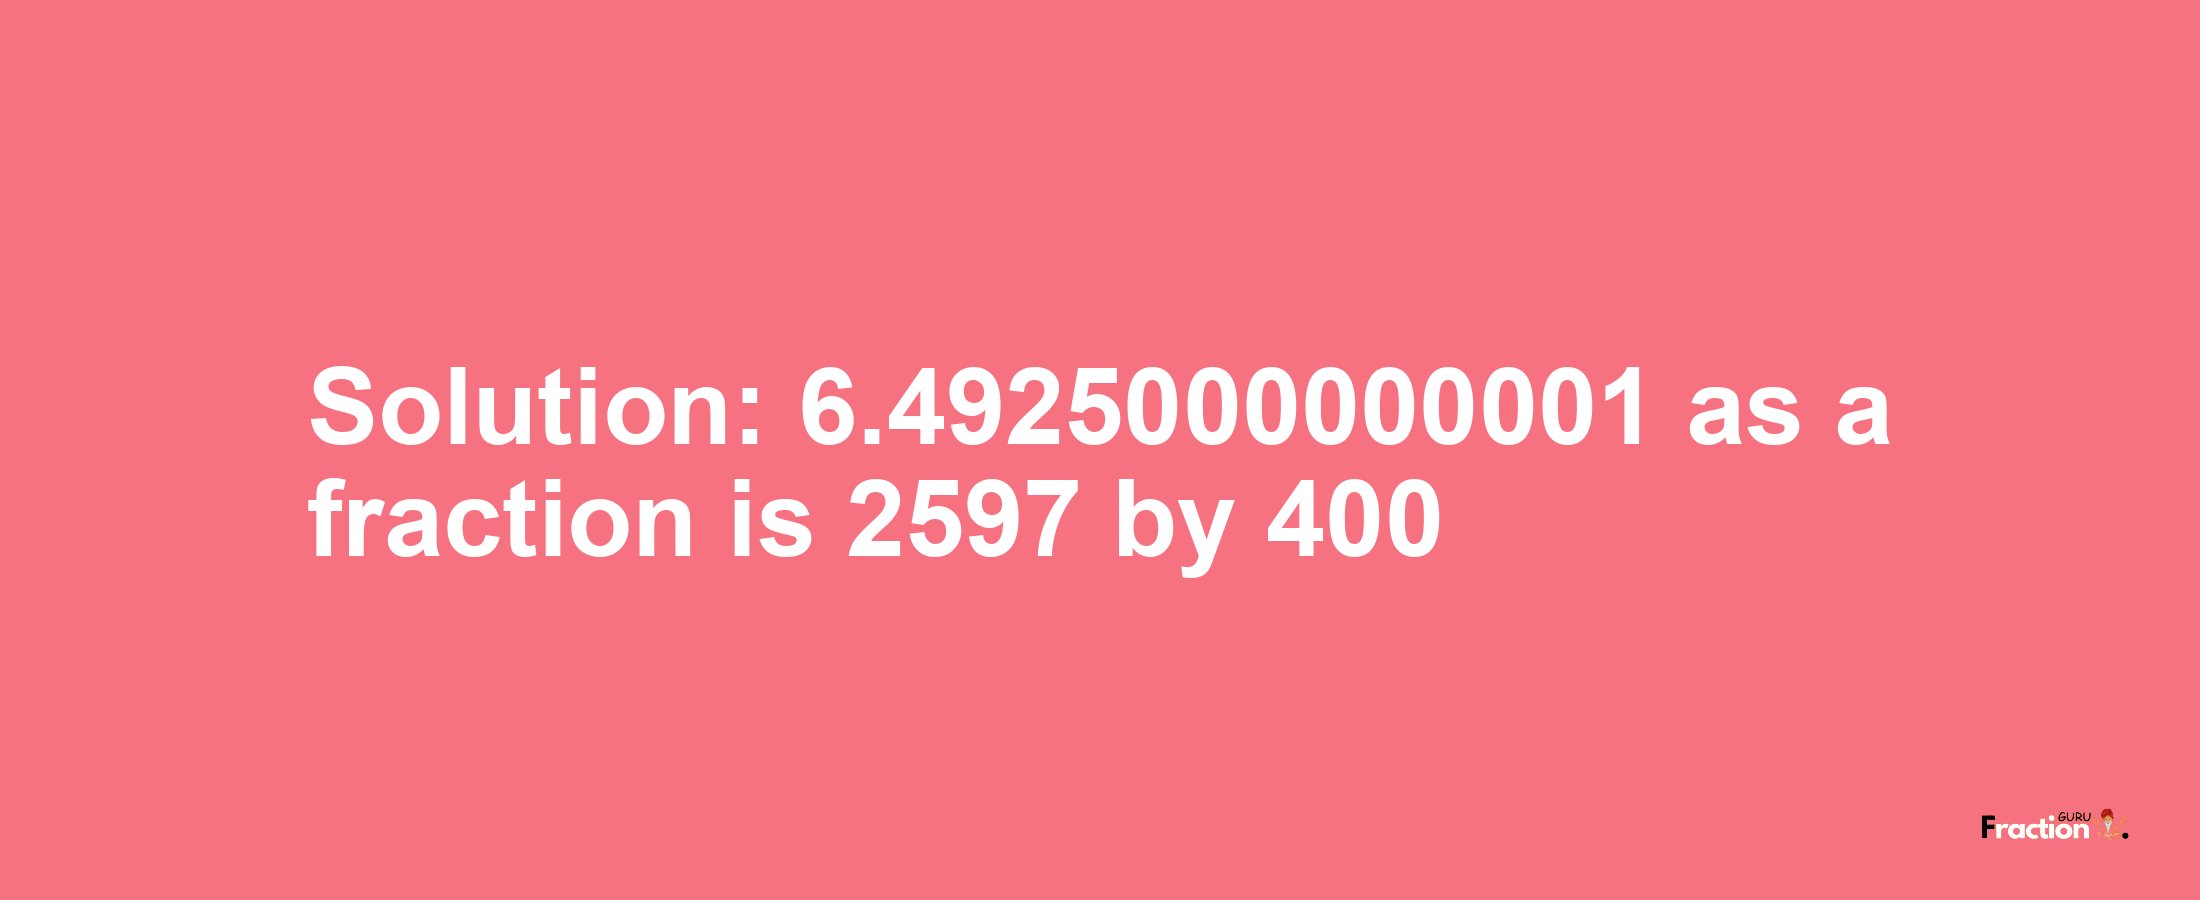 Solution:6.4925000000001 as a fraction is 2597/400